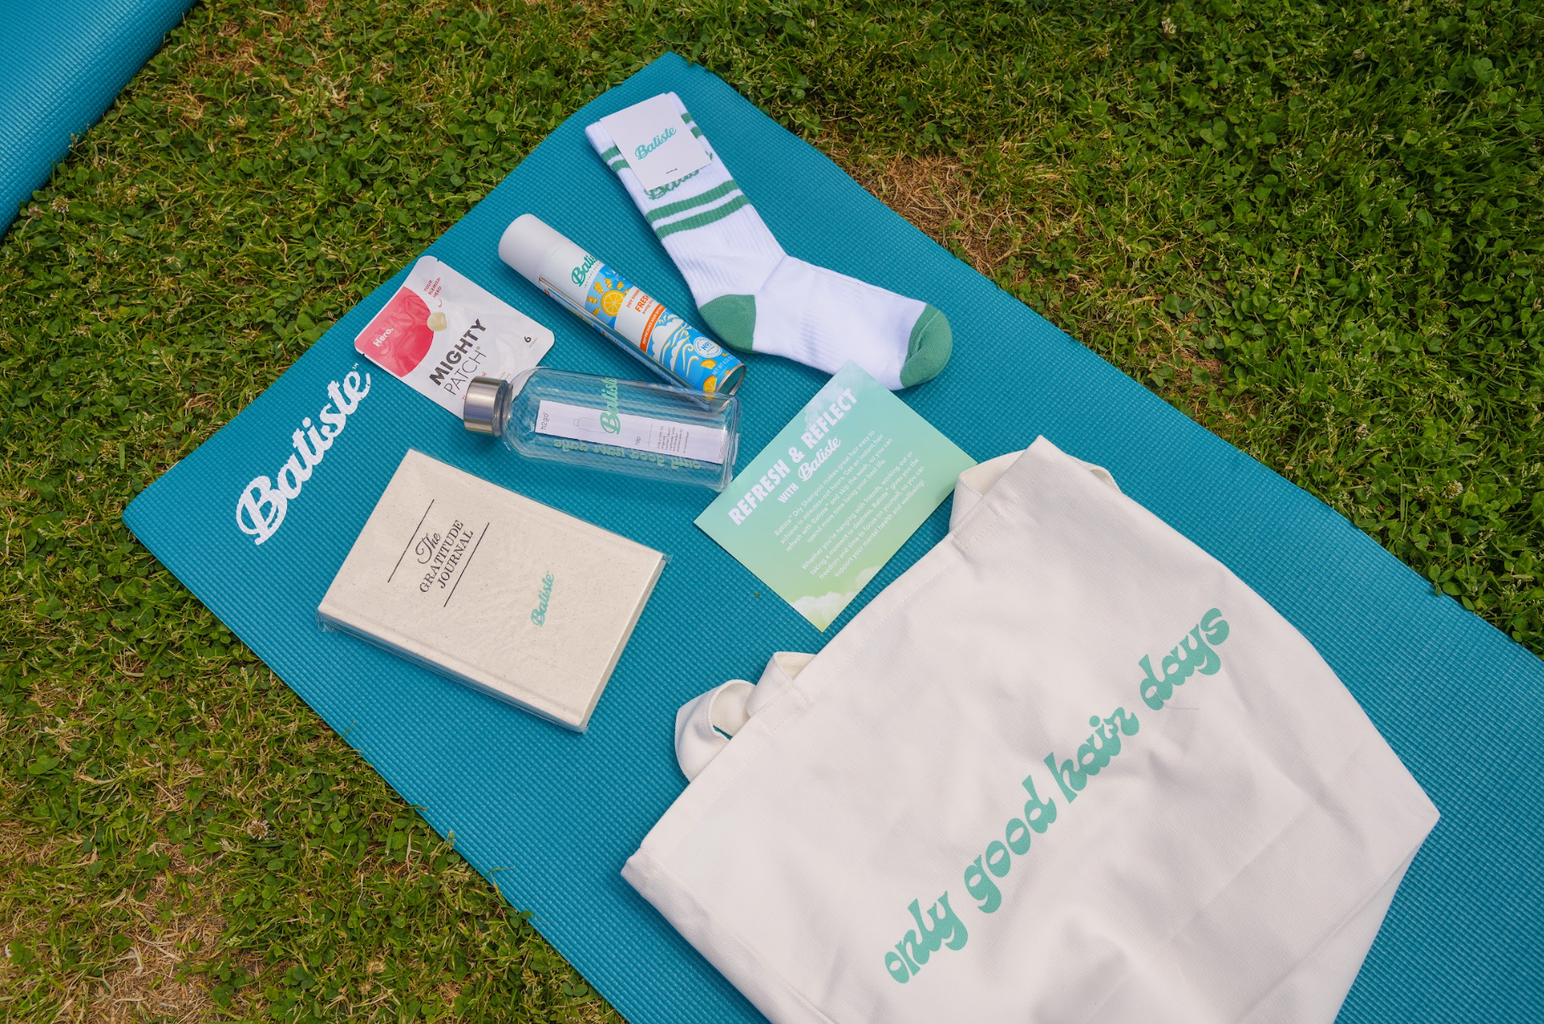 Batiste products on a blue yoga mat.